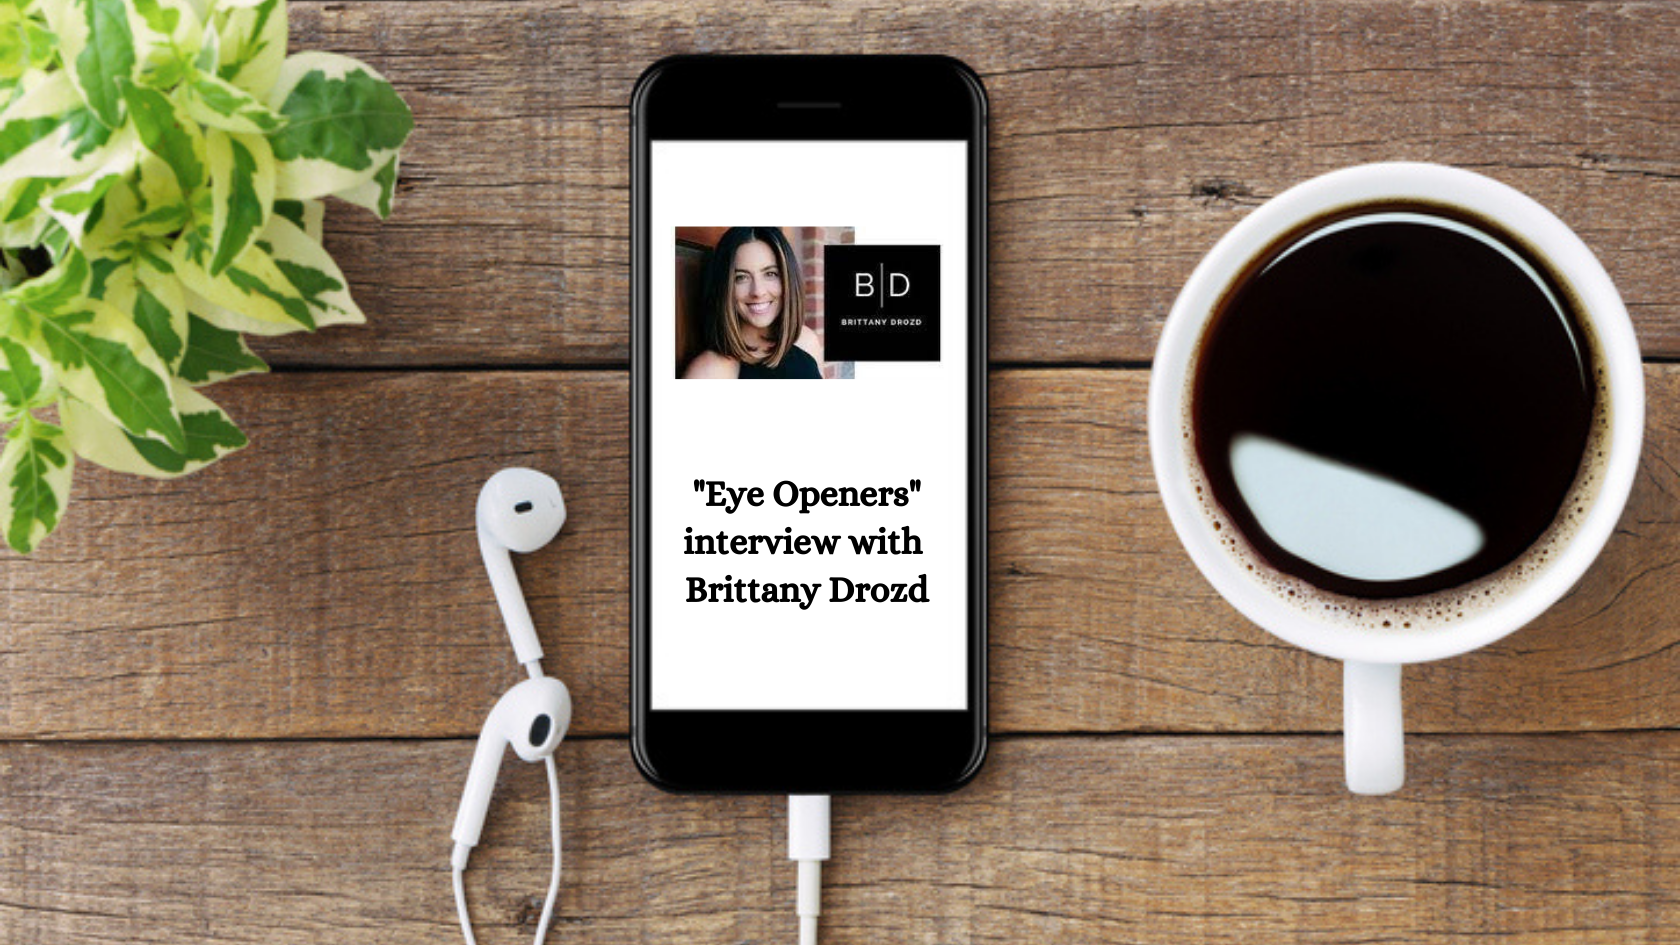 Derek Amey on “Eye Openers” with Brittany Drozd